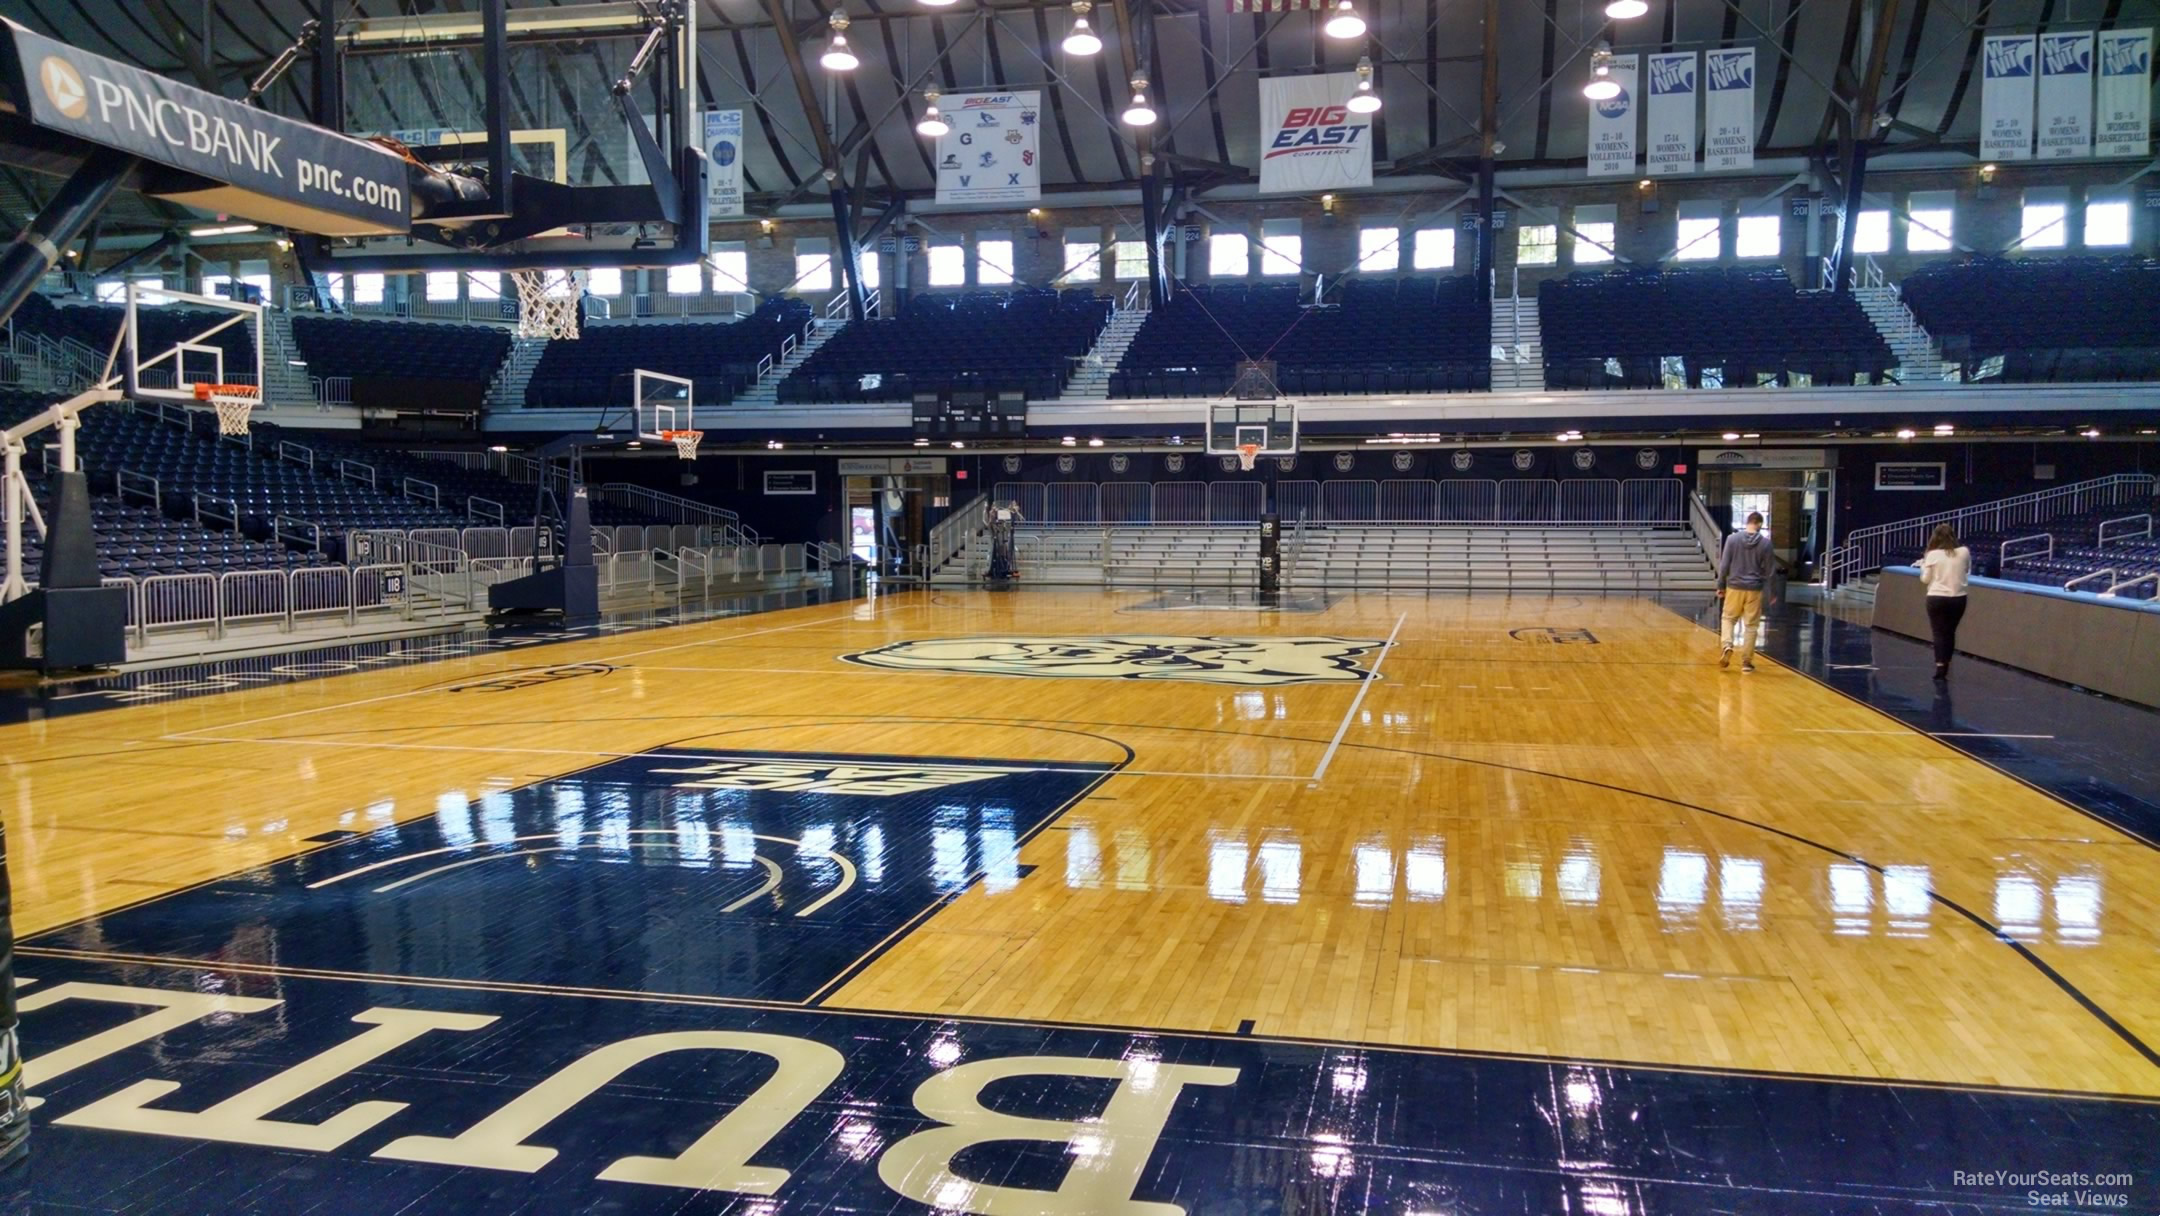 section 111, row 3 seat view  - hinkle fieldhouse